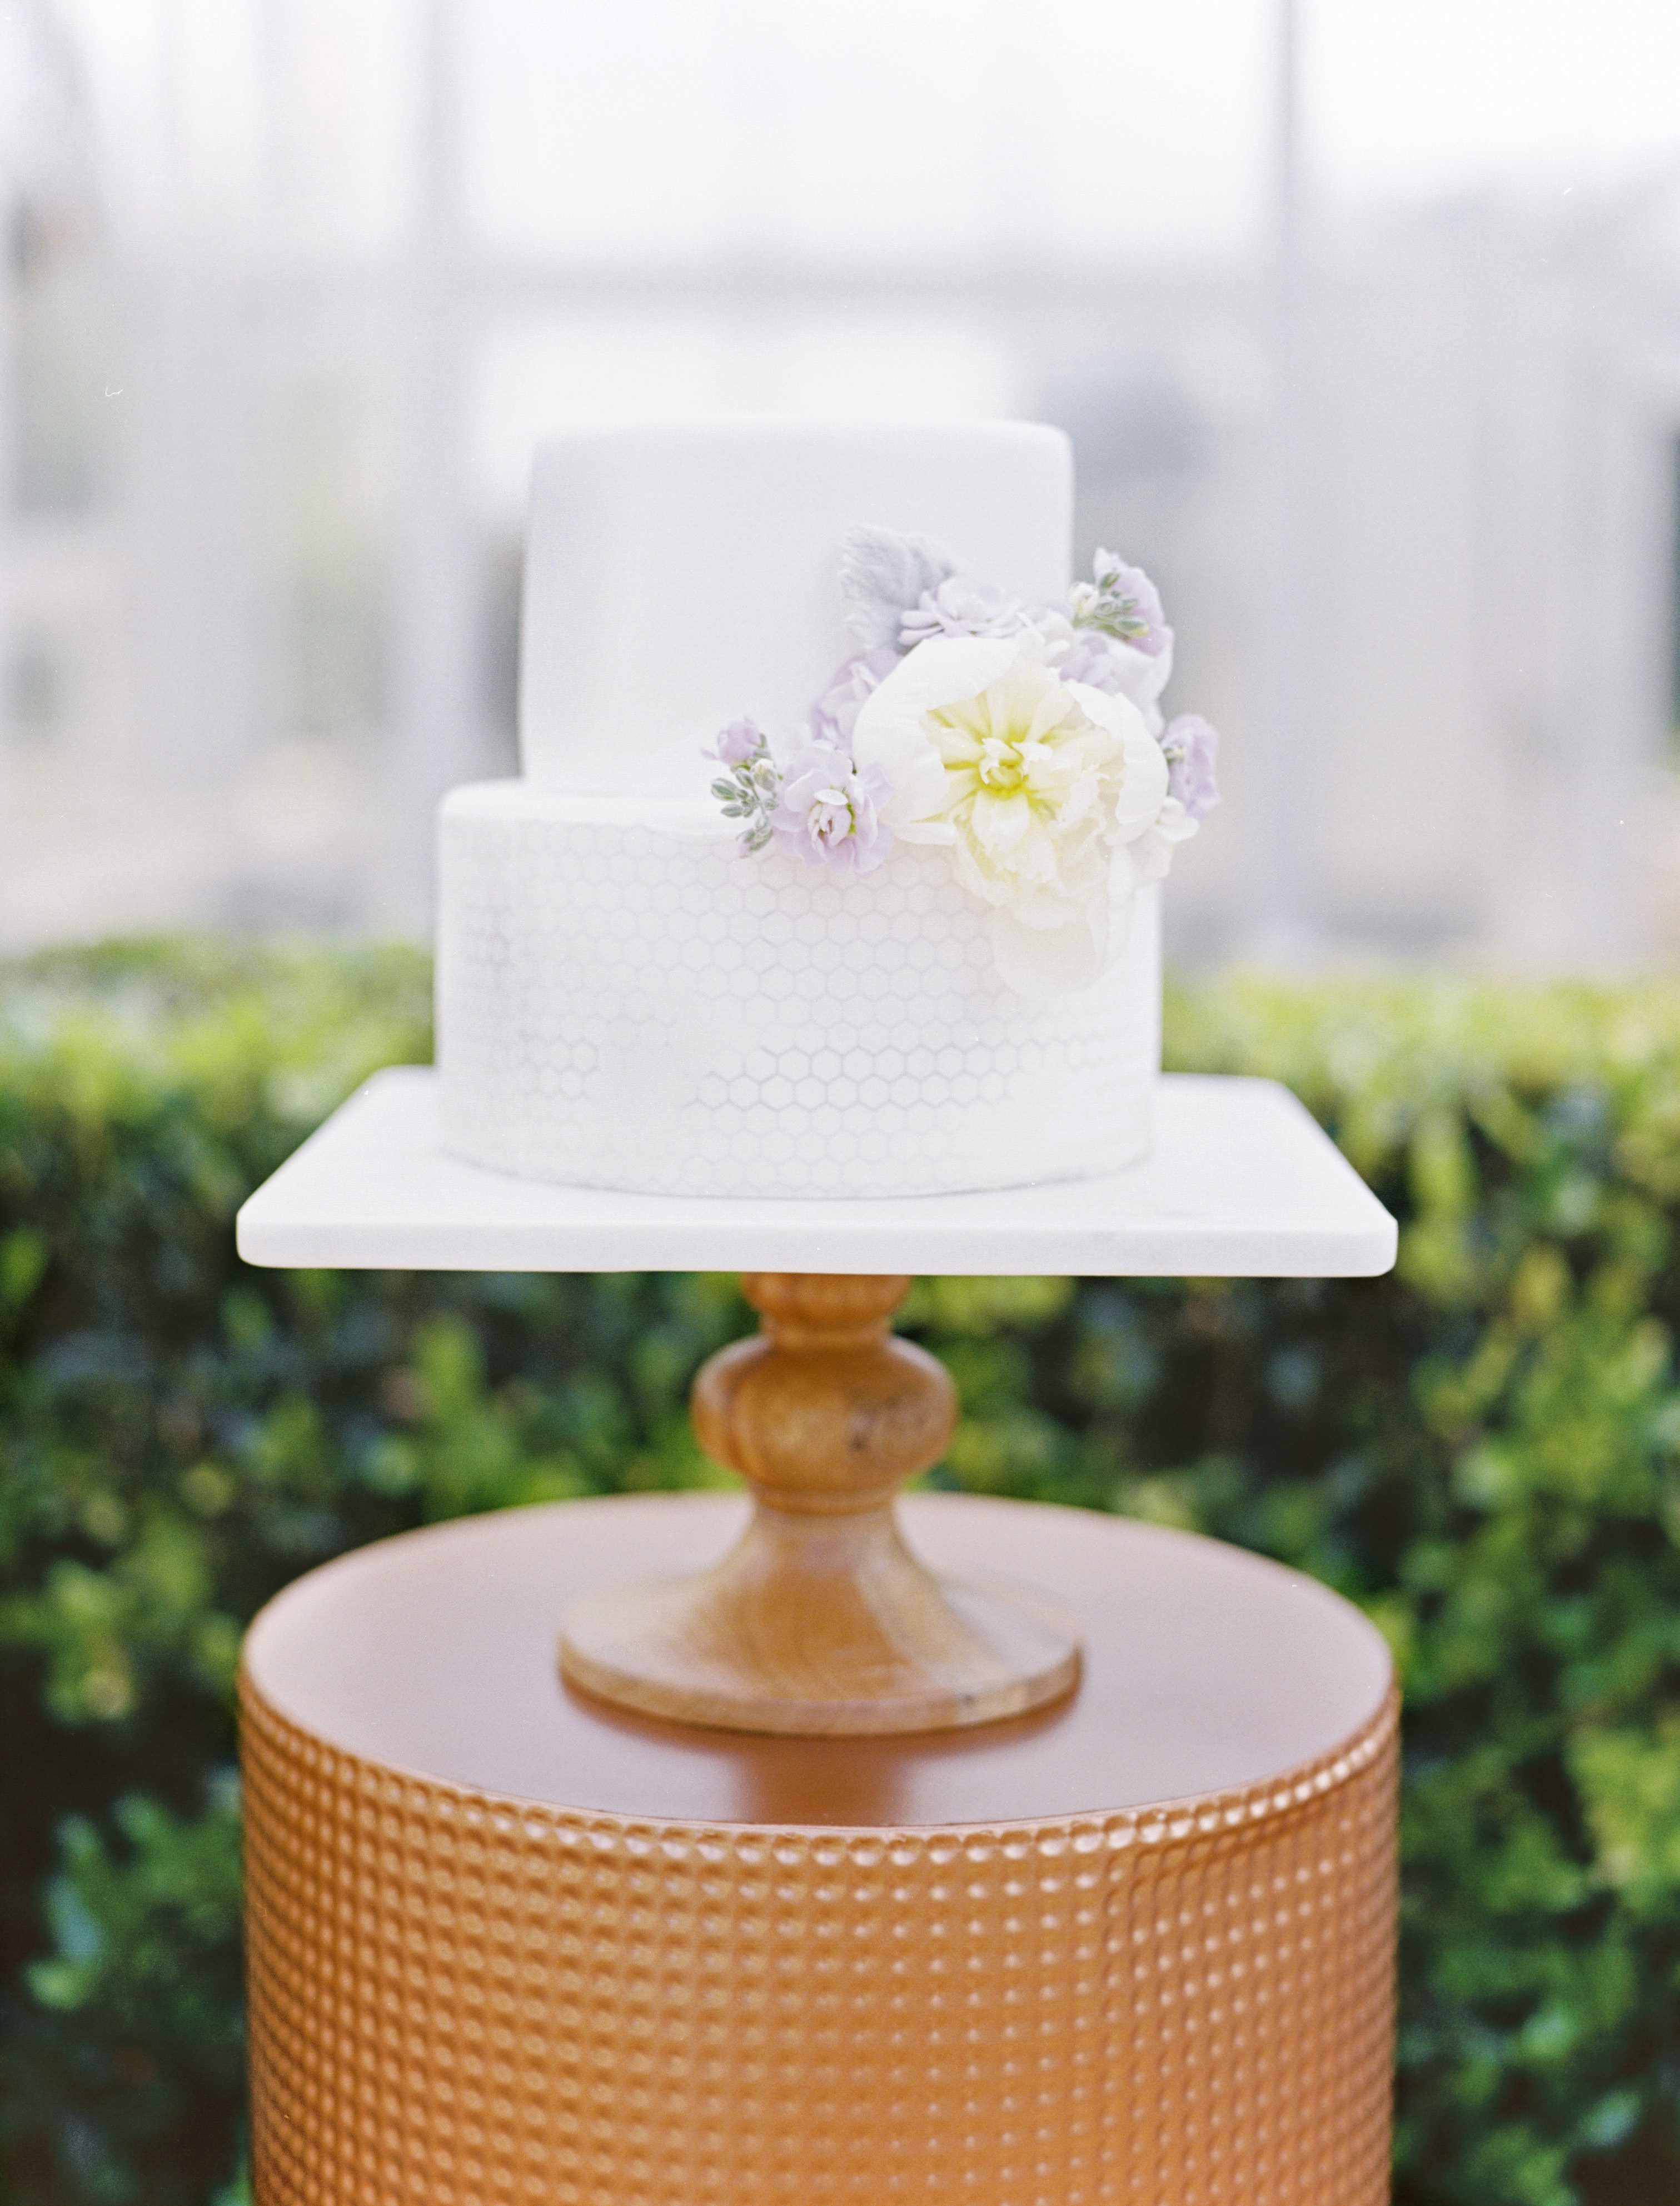 honeycomb patterned wedding cake at a lavender and copper wedding